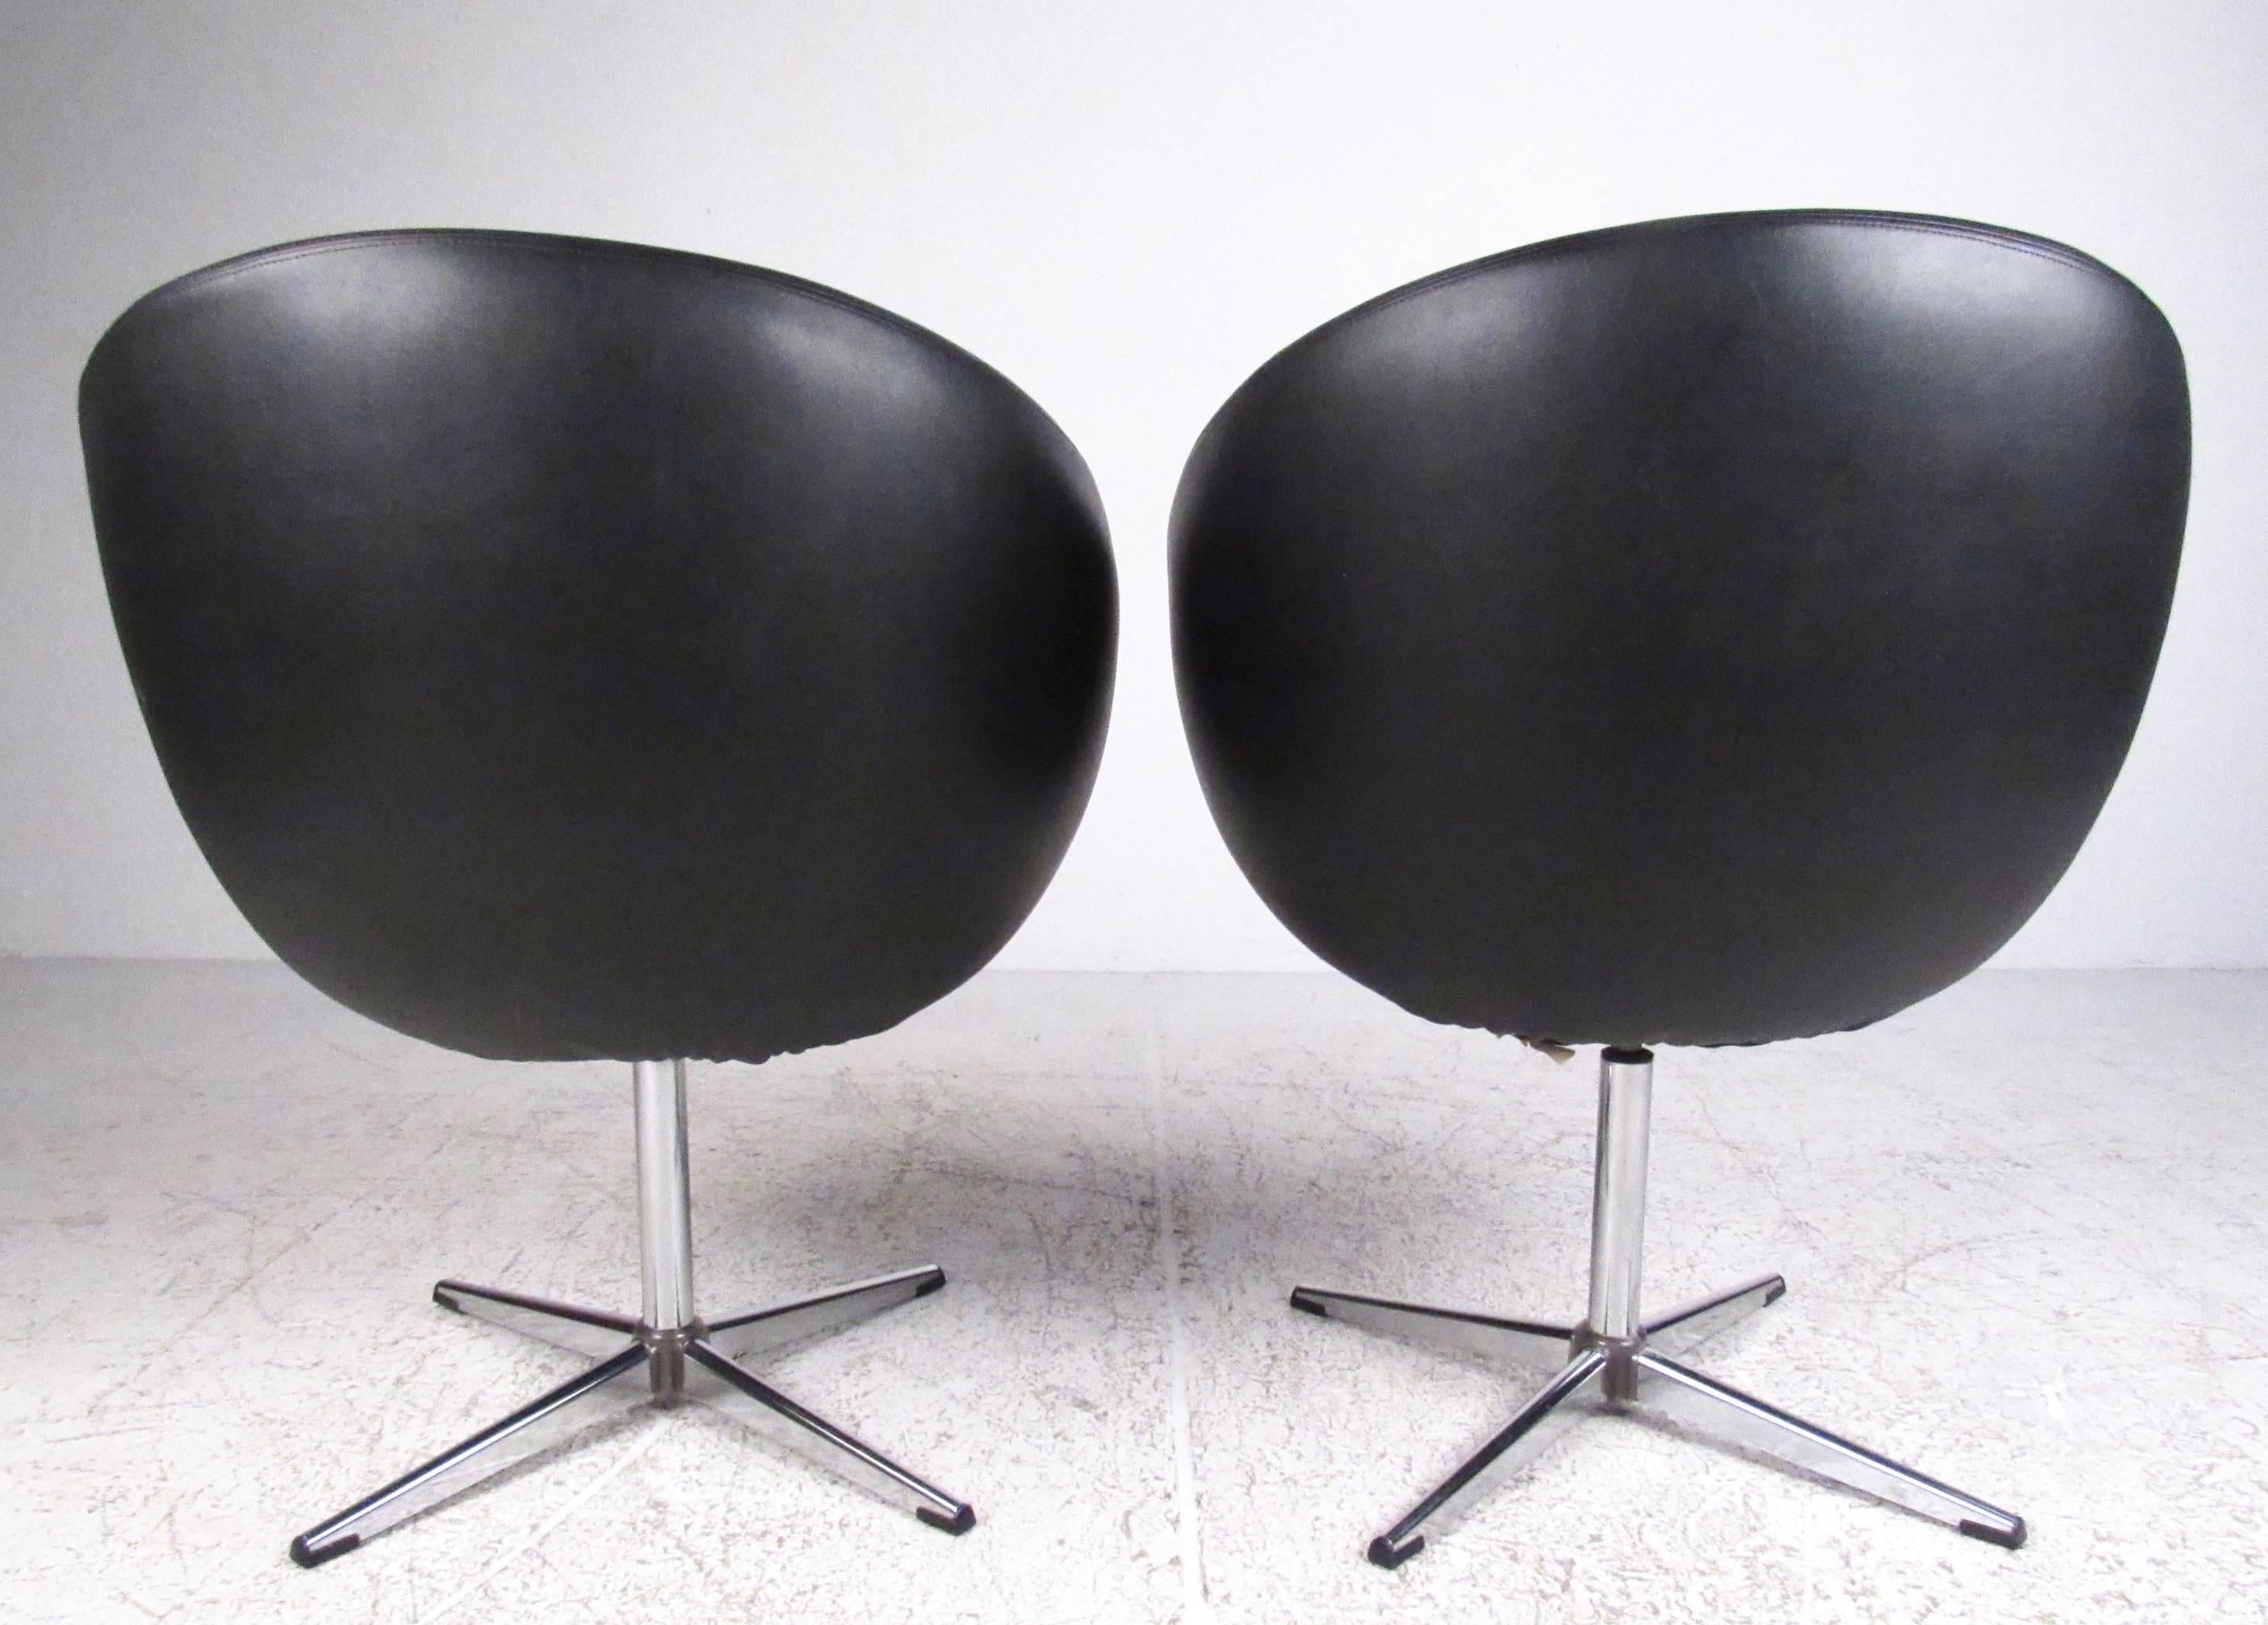 This iconic pair of overman pod chairs features swivel seats on sturdy chrome 